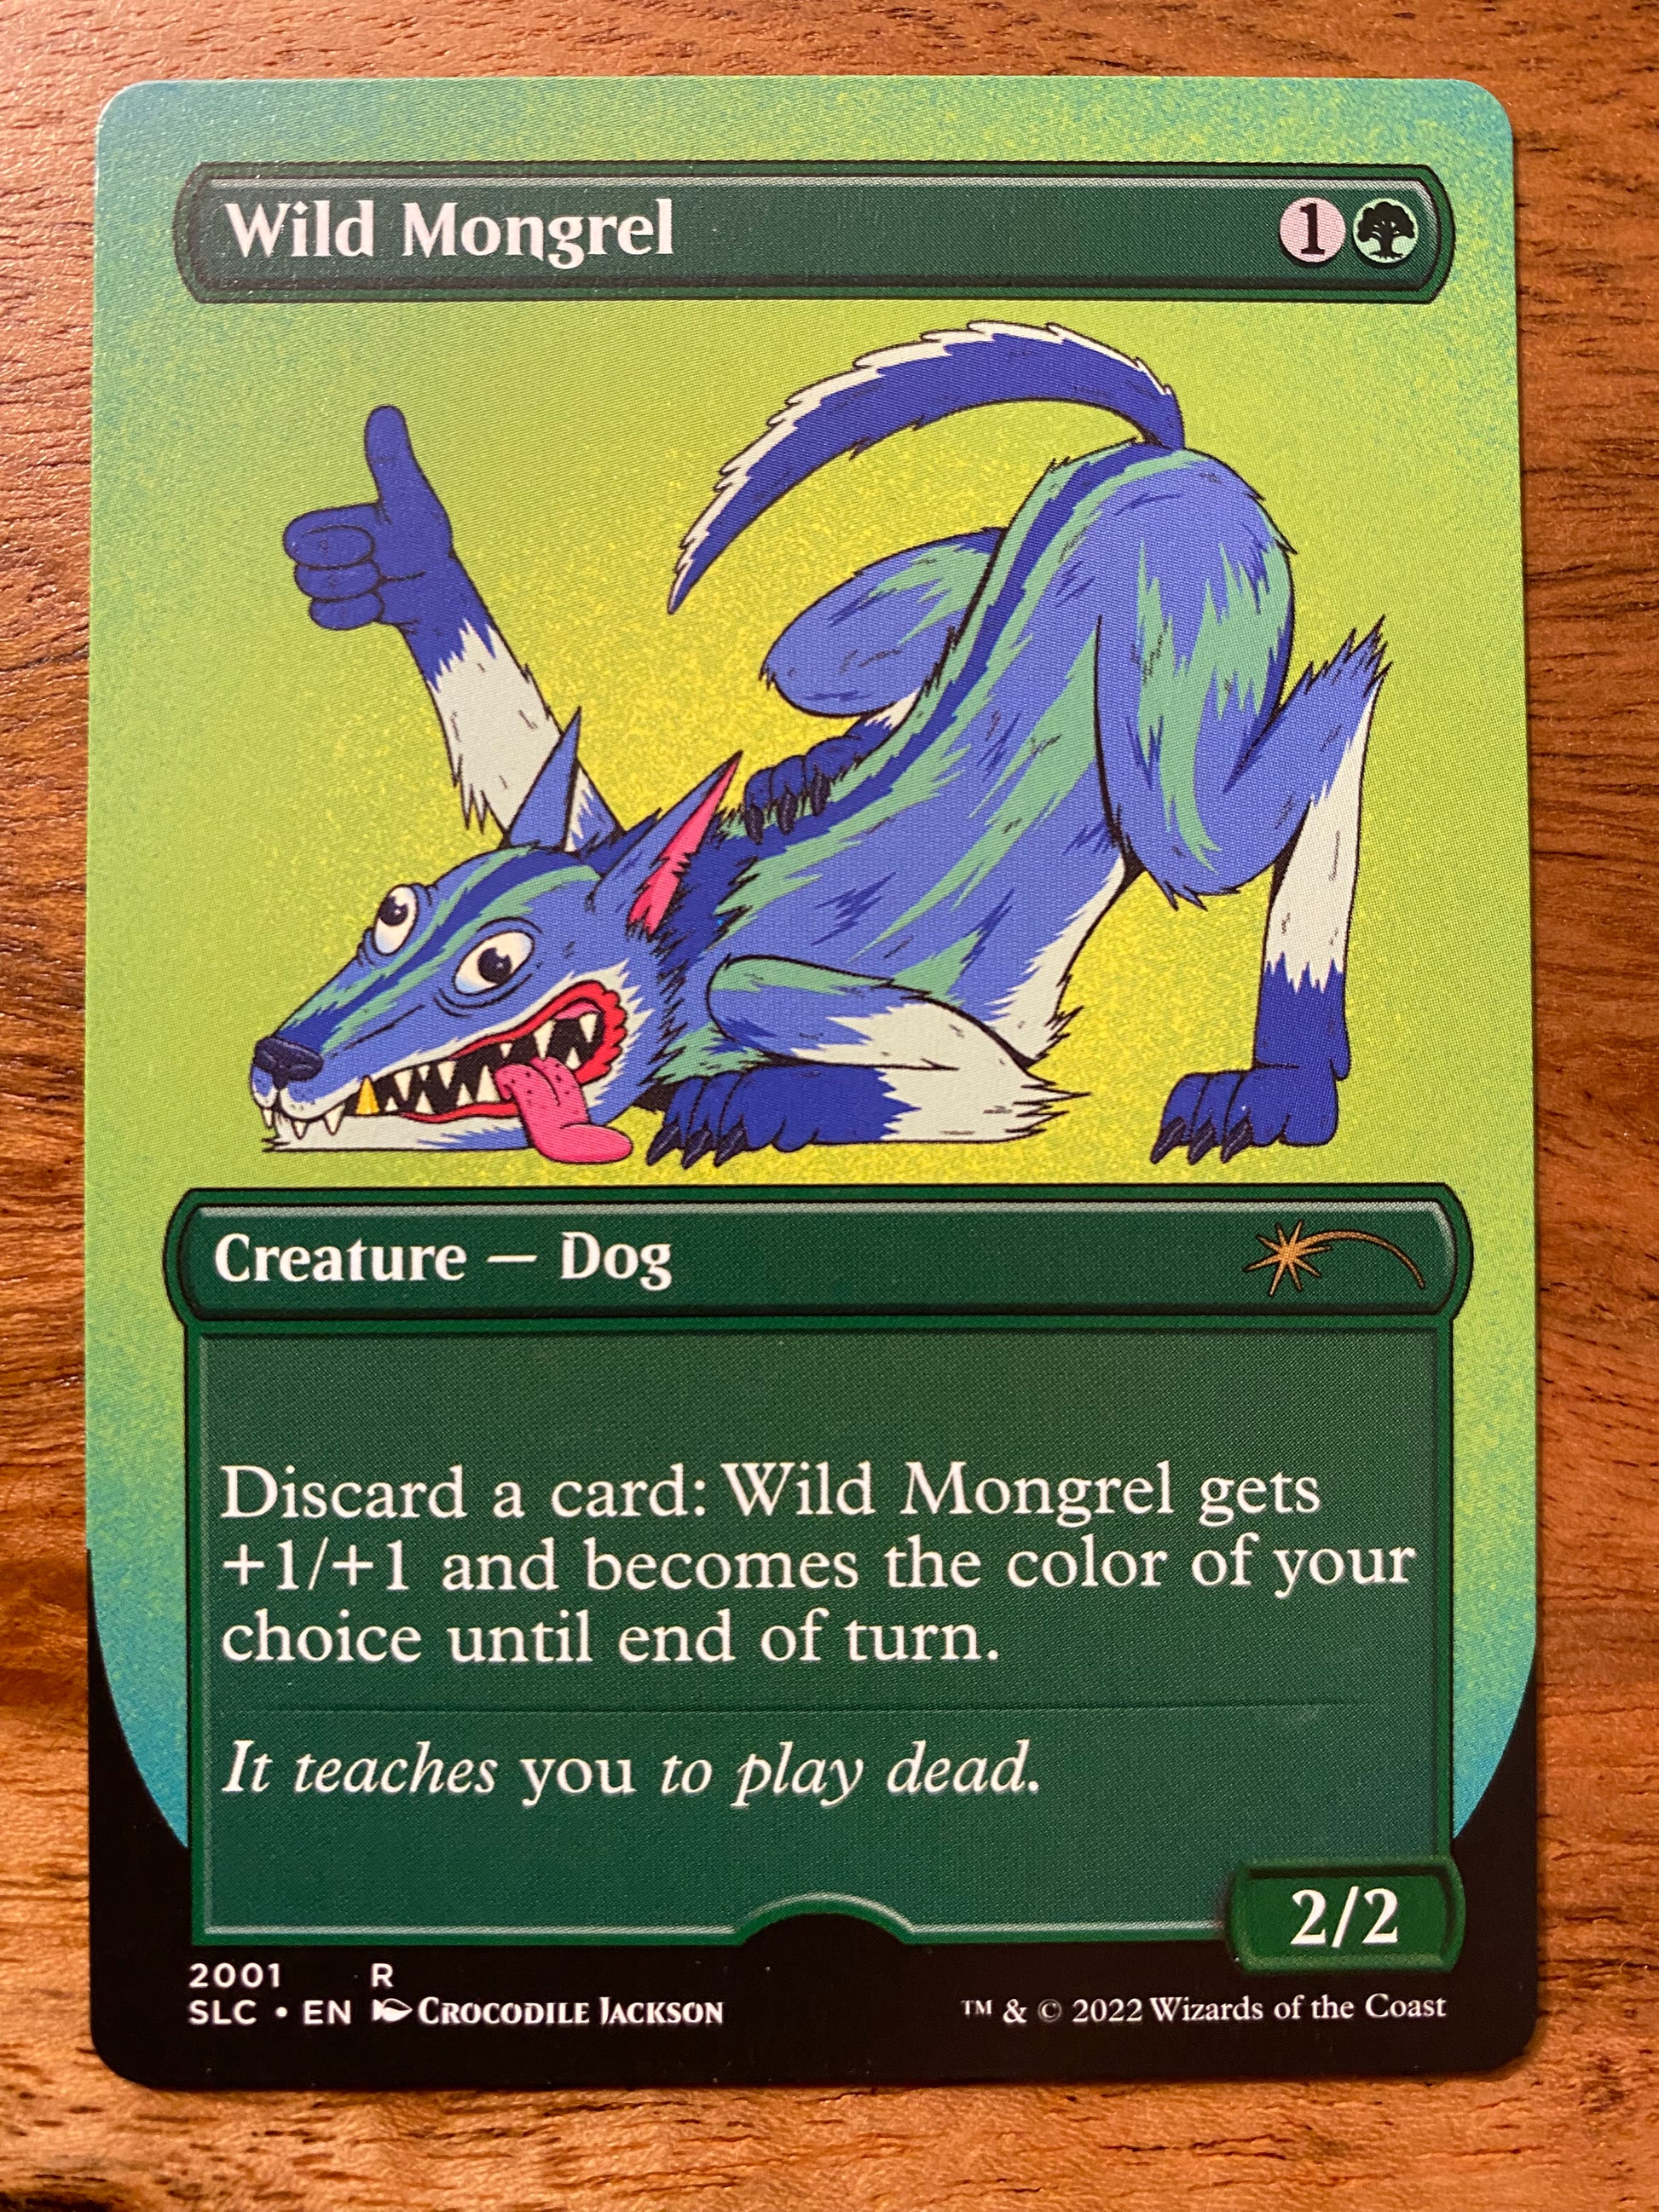 A trading card that has an image of a blue, green and white cartoon dog in a playful position with it's butt in the air. The right paw is extended in the air with a thumbs up. The title at the top of the card reads Wild Mongrel.